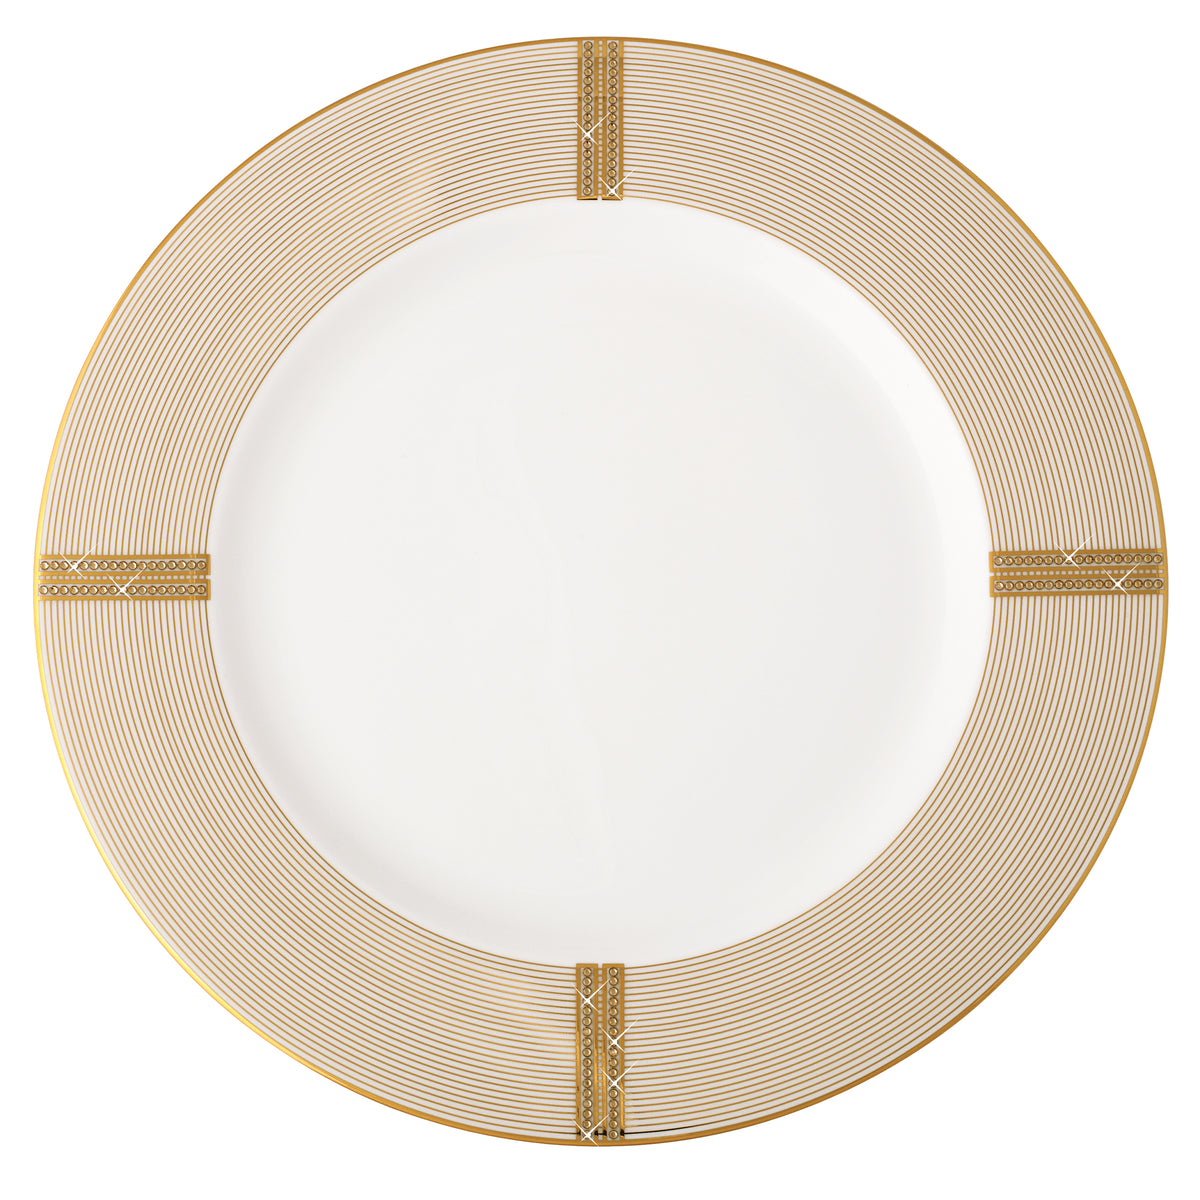 Prouna Regency Gold Charger Plate White Background Photo